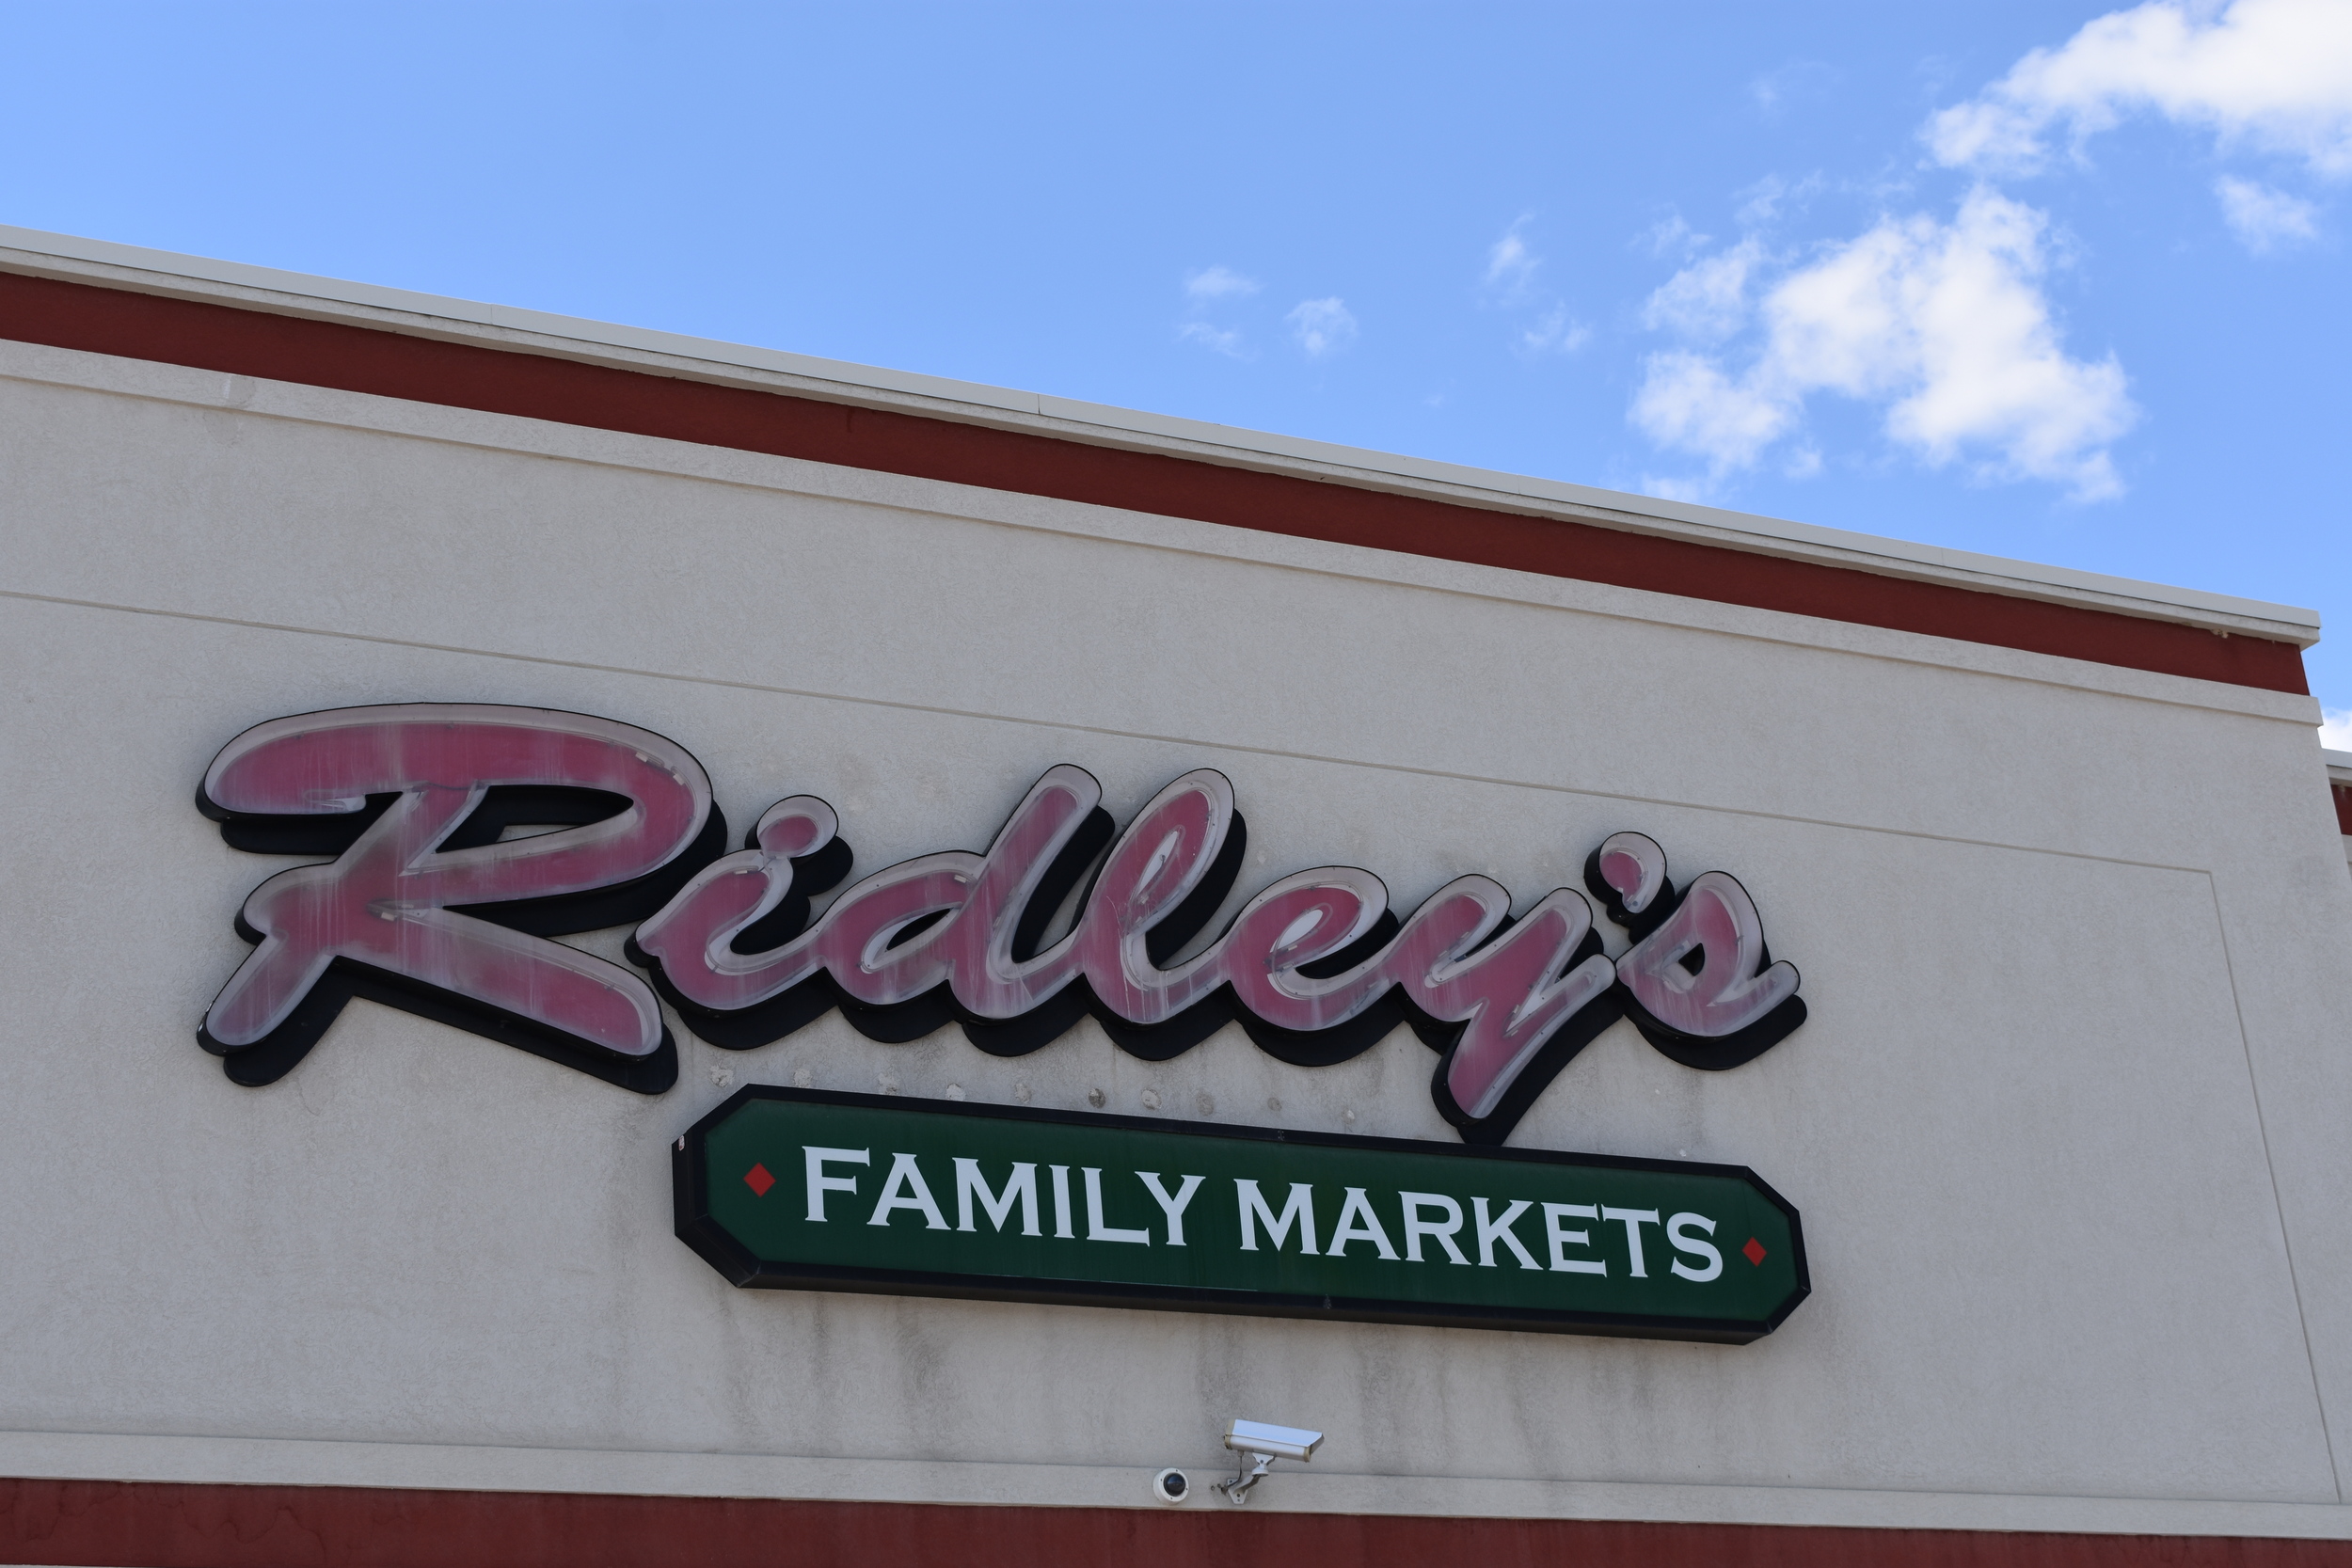 Ridley's Family Market wall mounted sign, Ely, Nevada